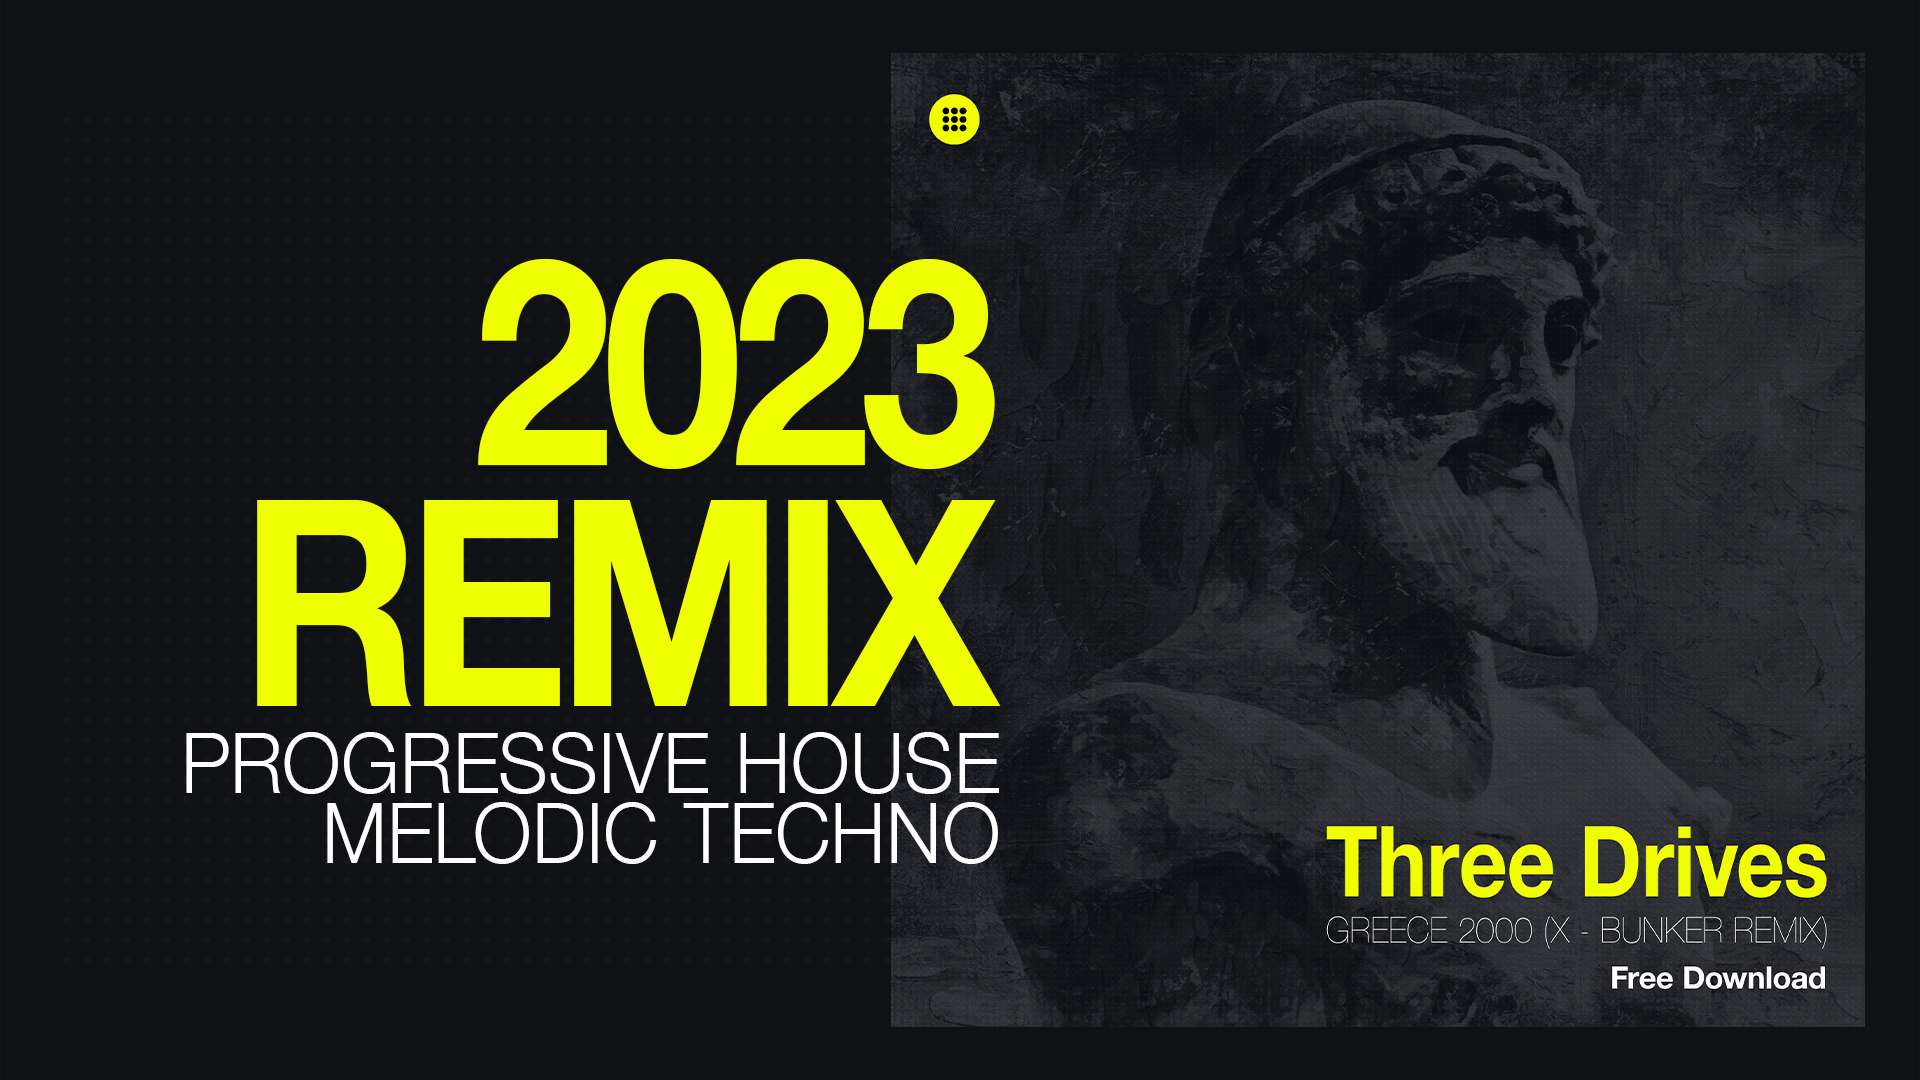 Greece 2000 from Three Drives Remix by X-Bunker